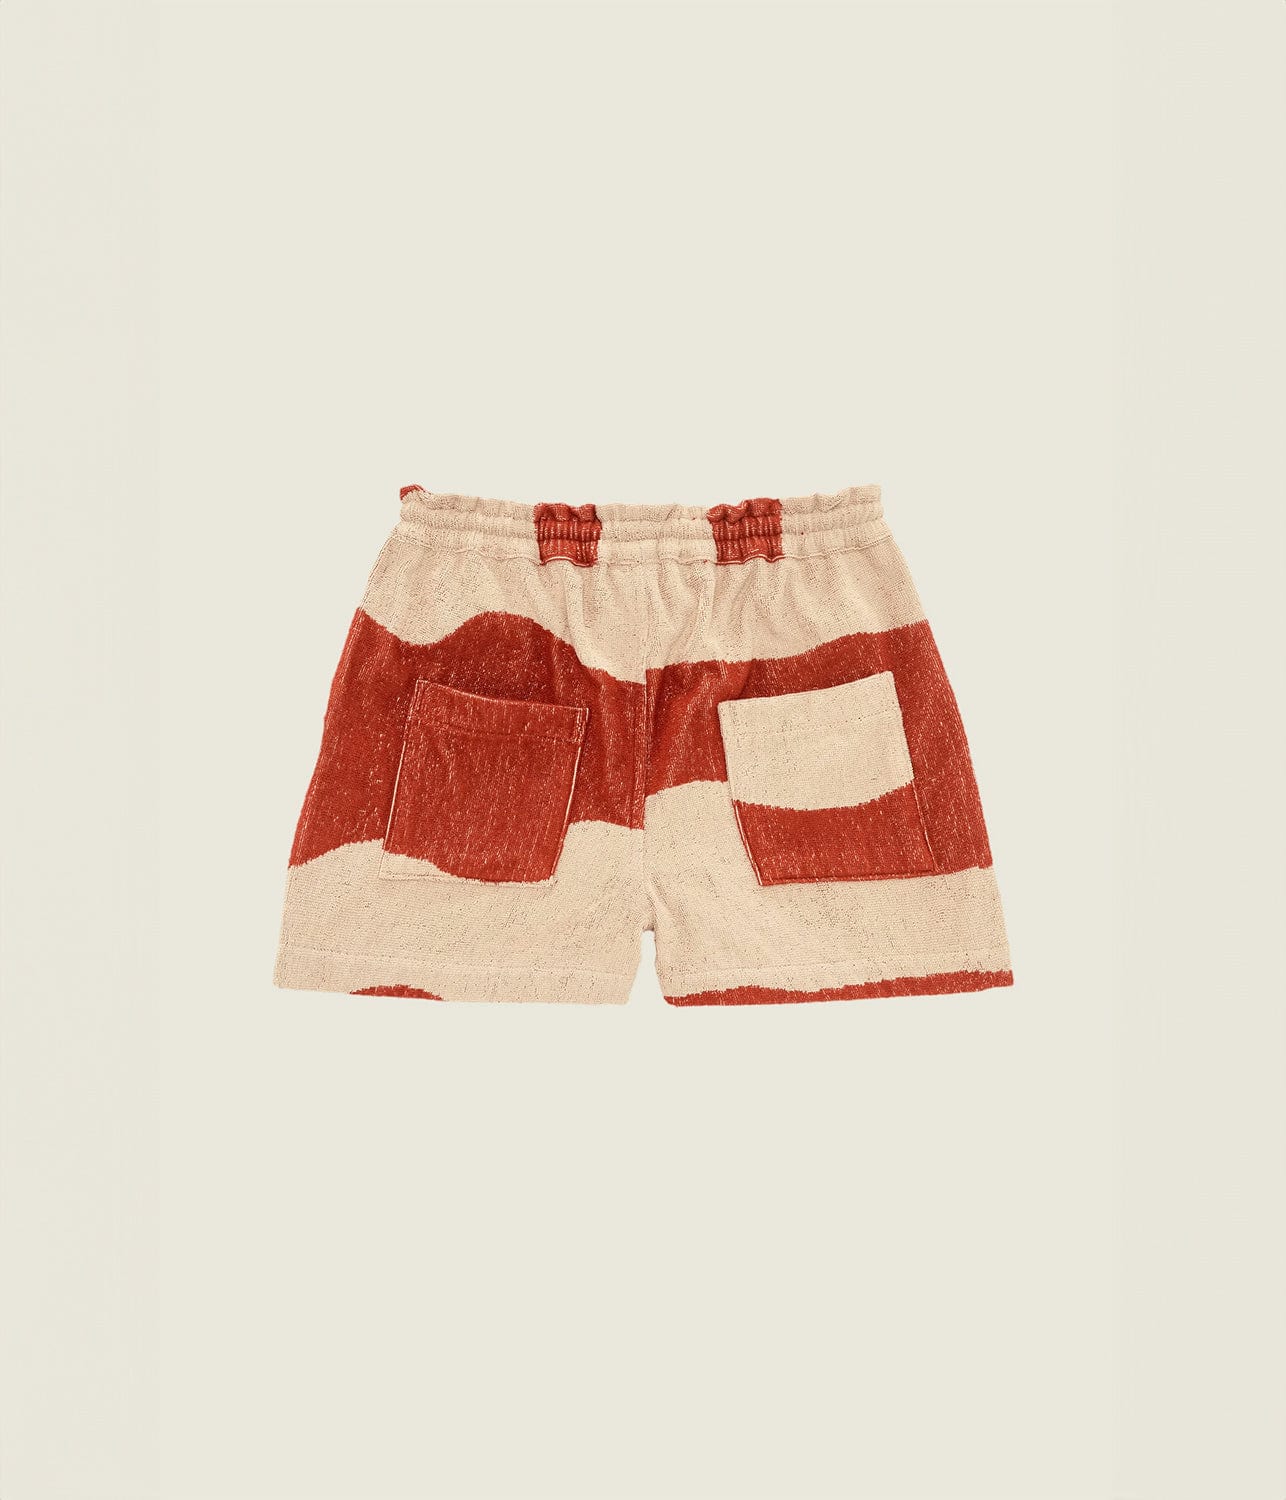 DRIZZLE TERRY SHORTS- AMBER DUNE | OAS COMPANY |  OAS COMPANY DRIZZLE TERRY SHORTS- AMBER DUNE